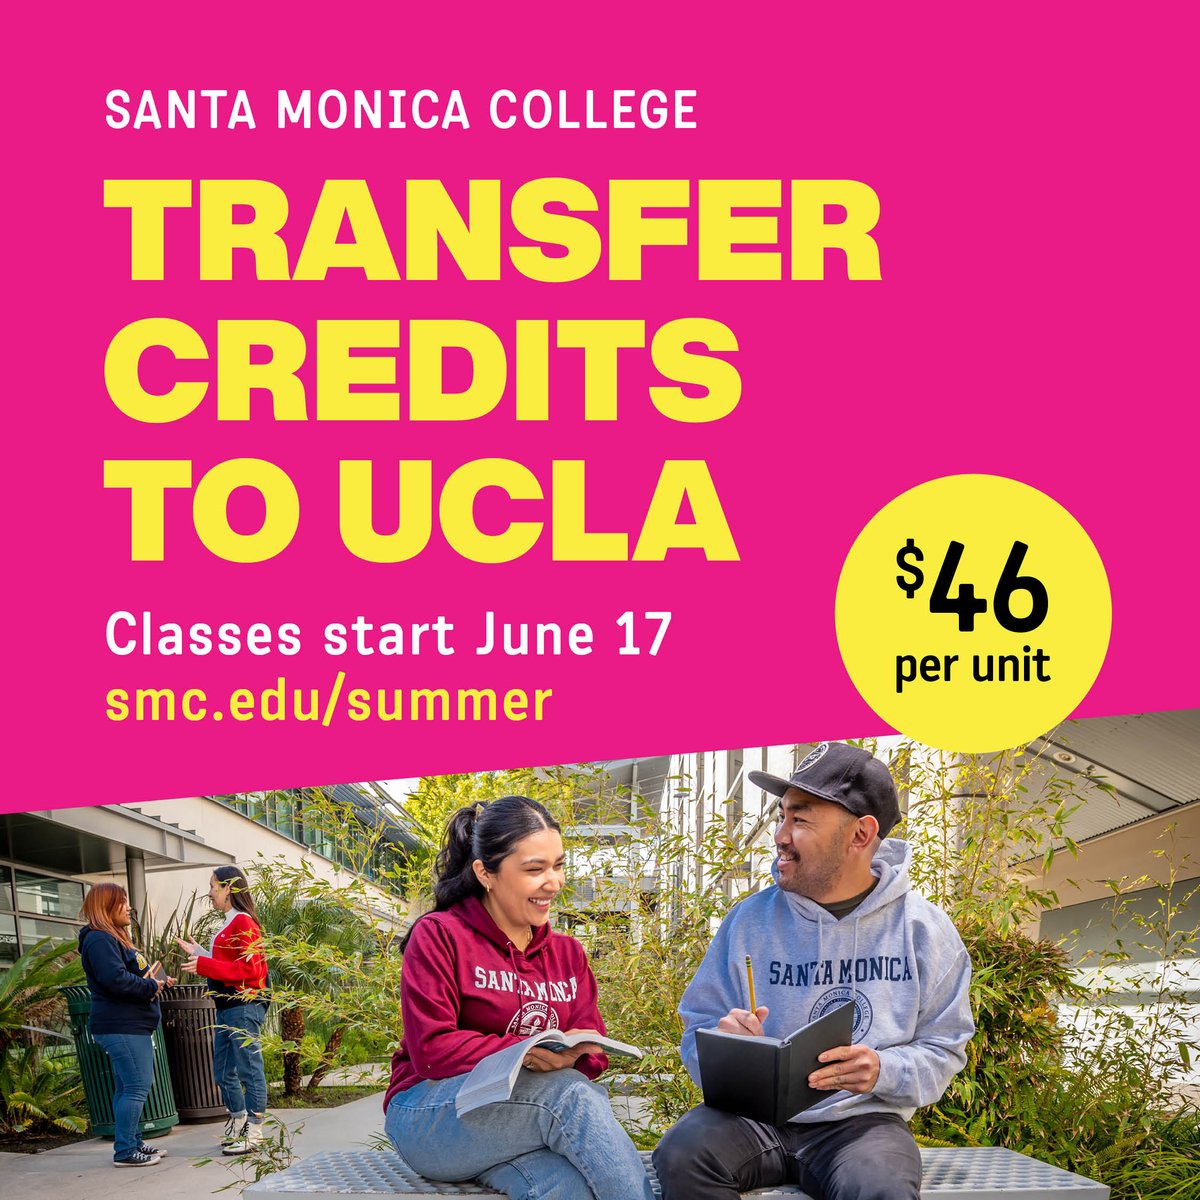 Sponsored: Enroll now for summer classes at Santa Monica College! In-person and online classes start June 17th. 3-unit summer courses cost less than $200, which is much cheaper than classes at nearby 4-year universities. smc.edu/summer